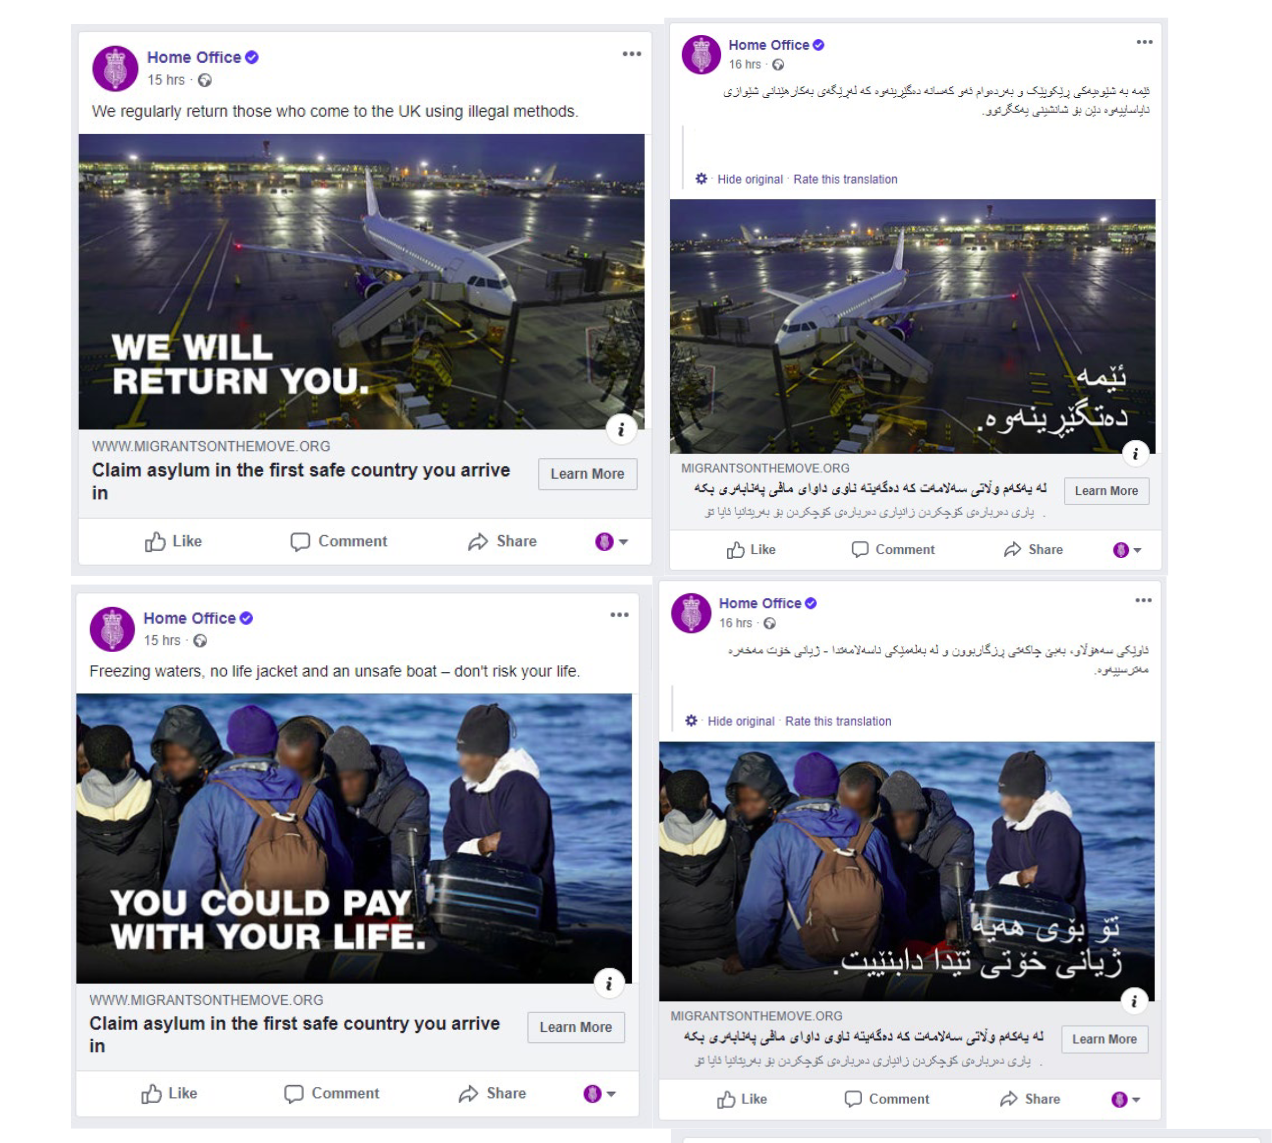 Screenshots of social media posts linking to Seefar’s ‘On the Move’ website, which were paid for by the Home Office as part of a campaign to deter Channel crossings